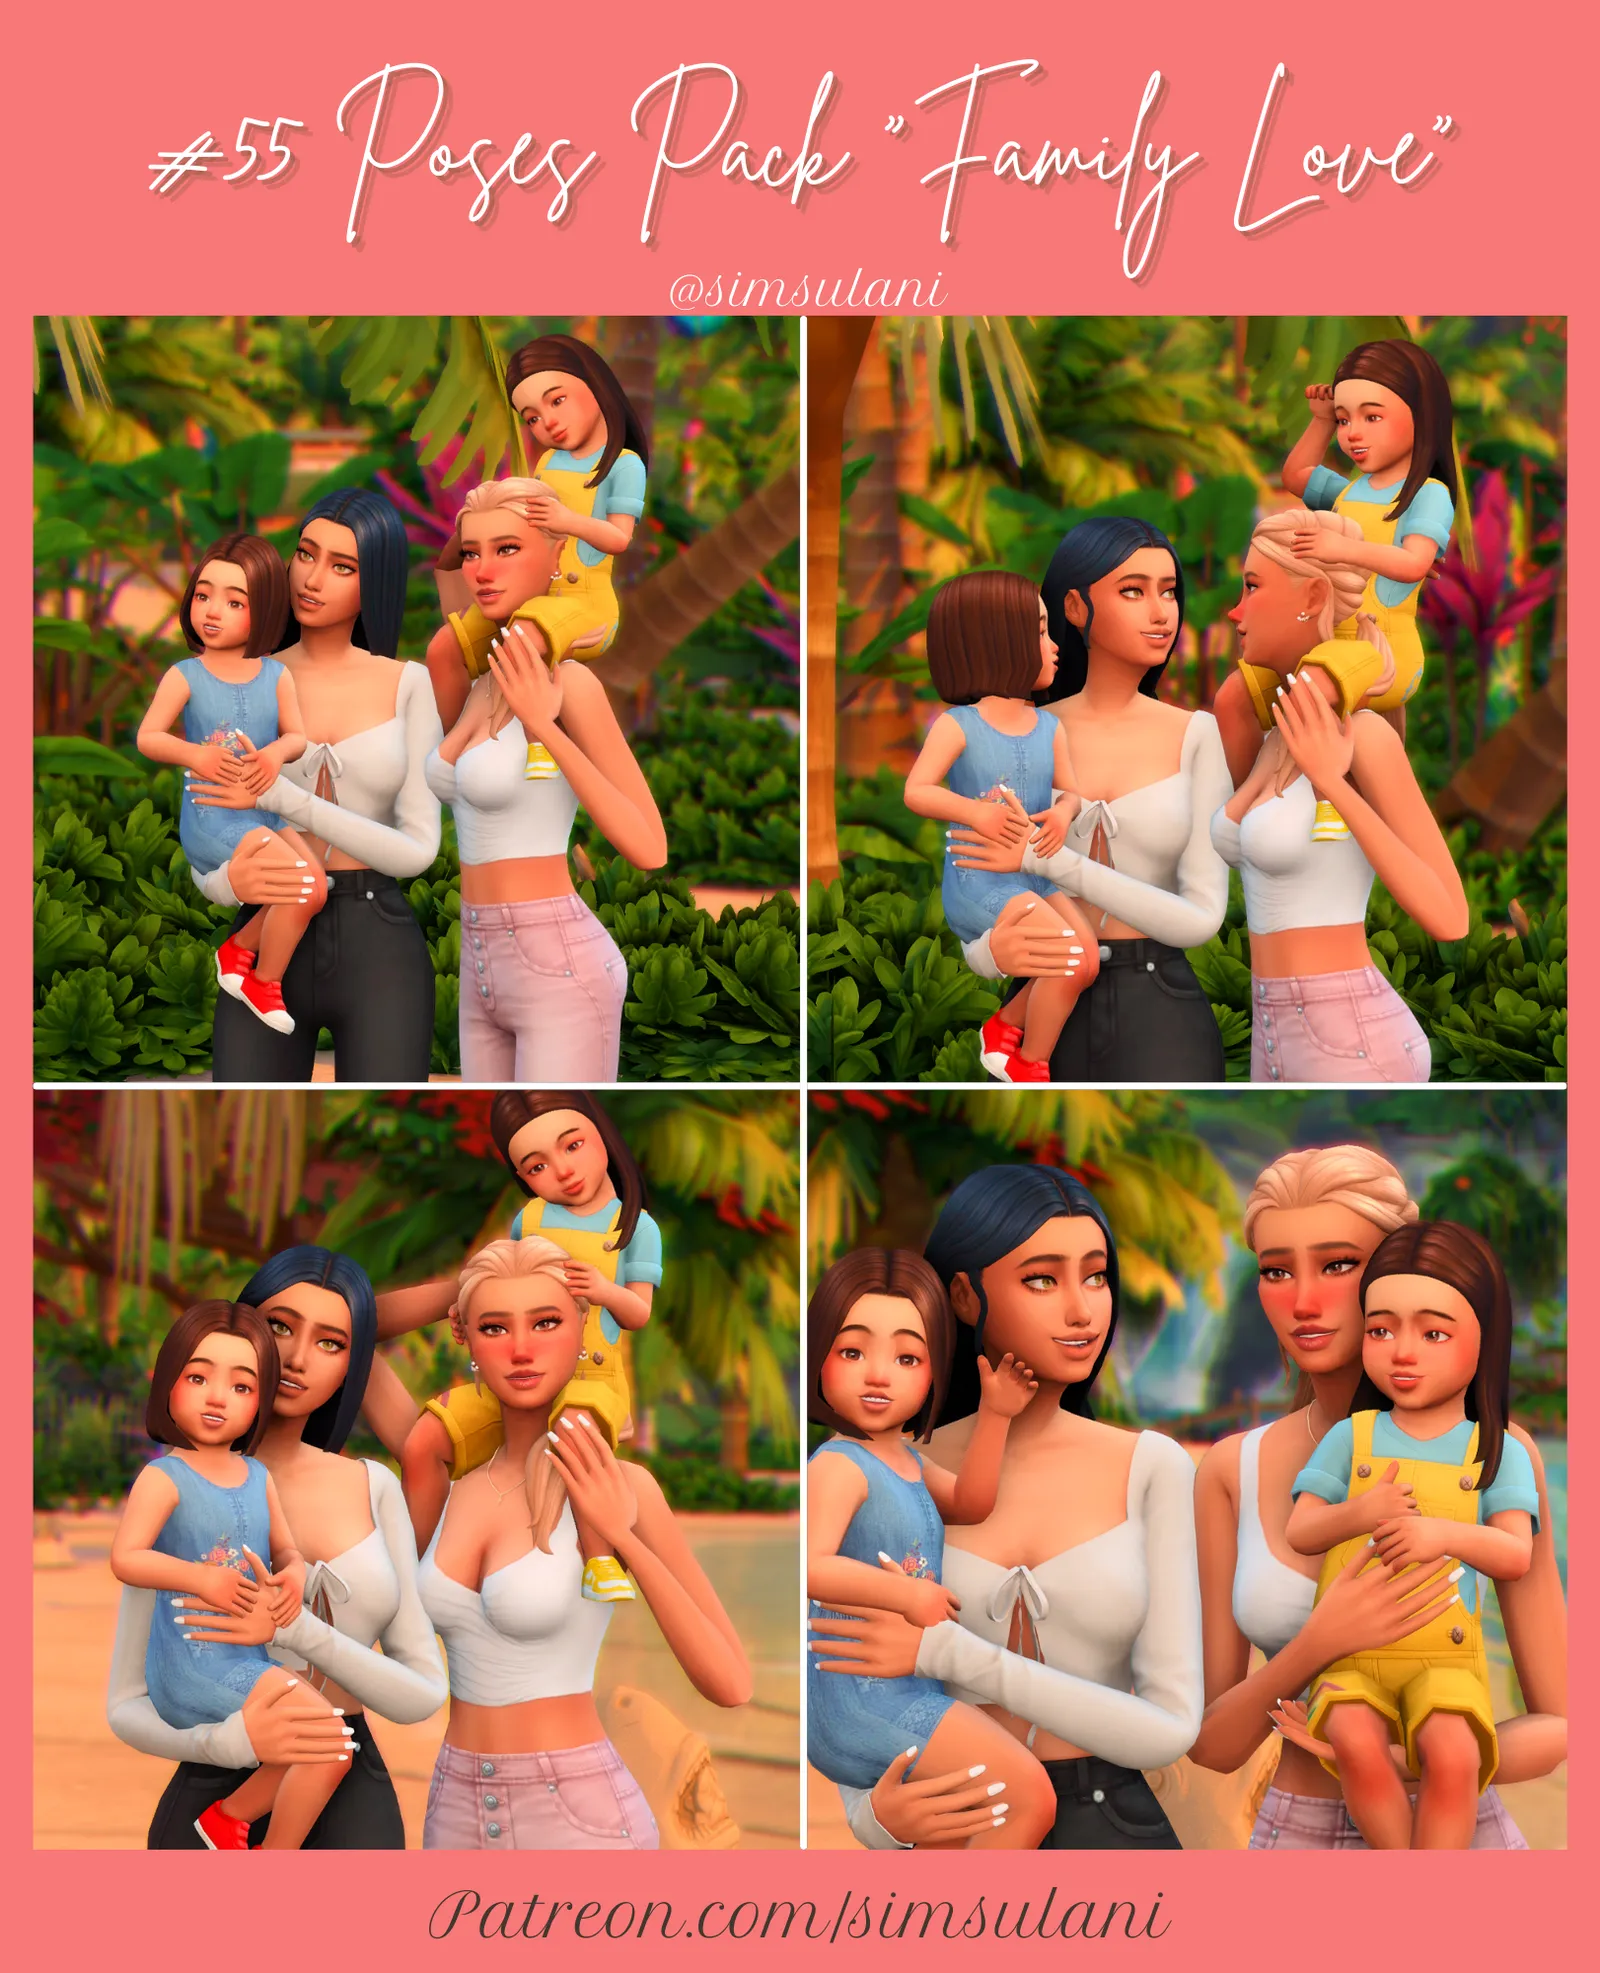 #55 Poses pack "Family Love" 